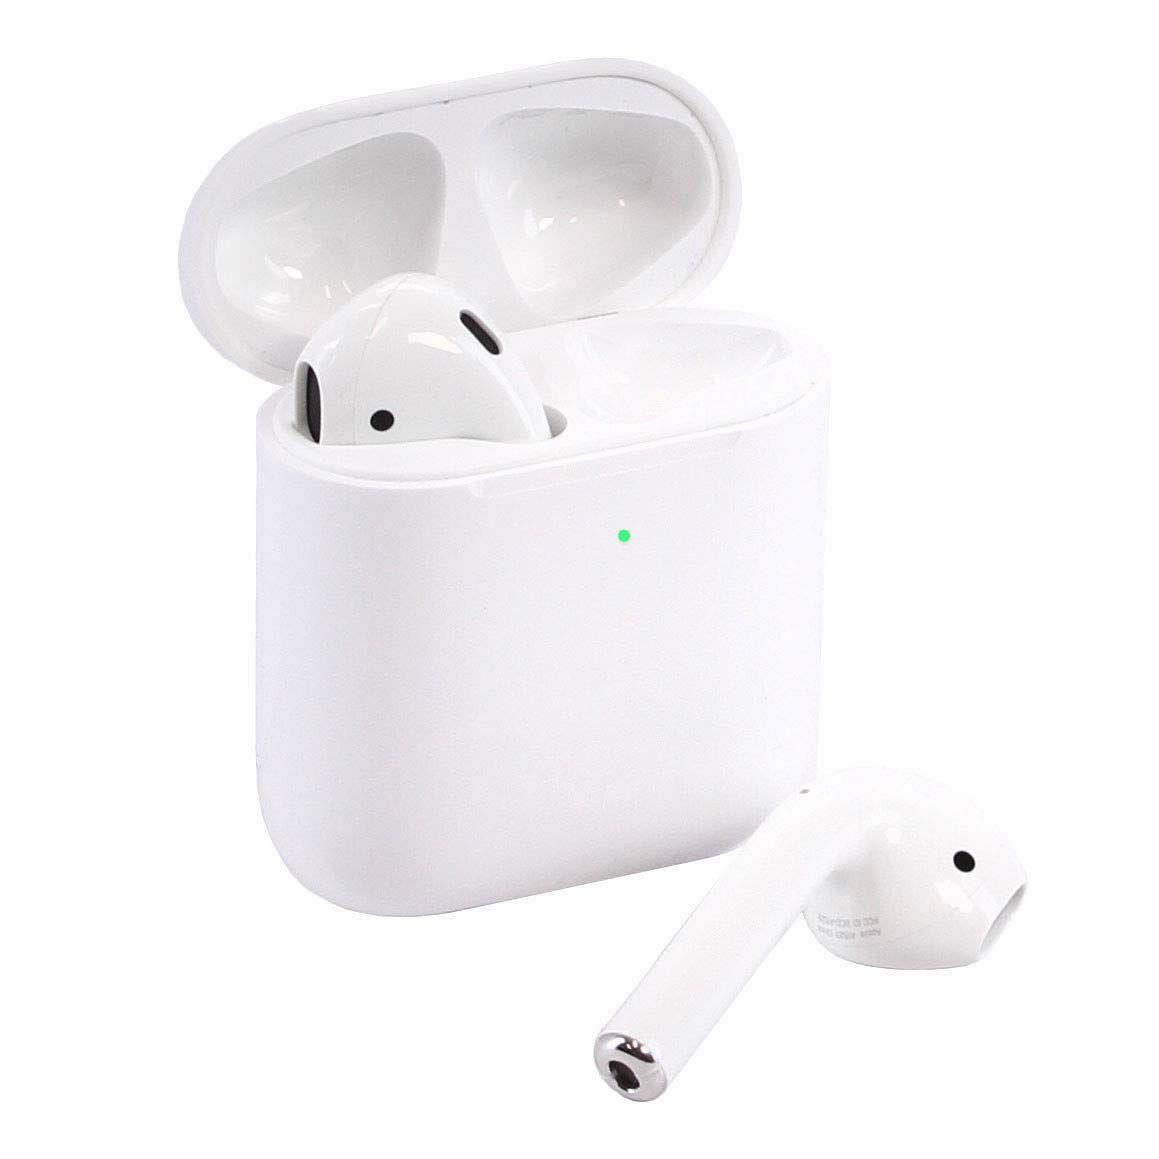 Wireless Bluetooth Headphones Iphone with induction charging